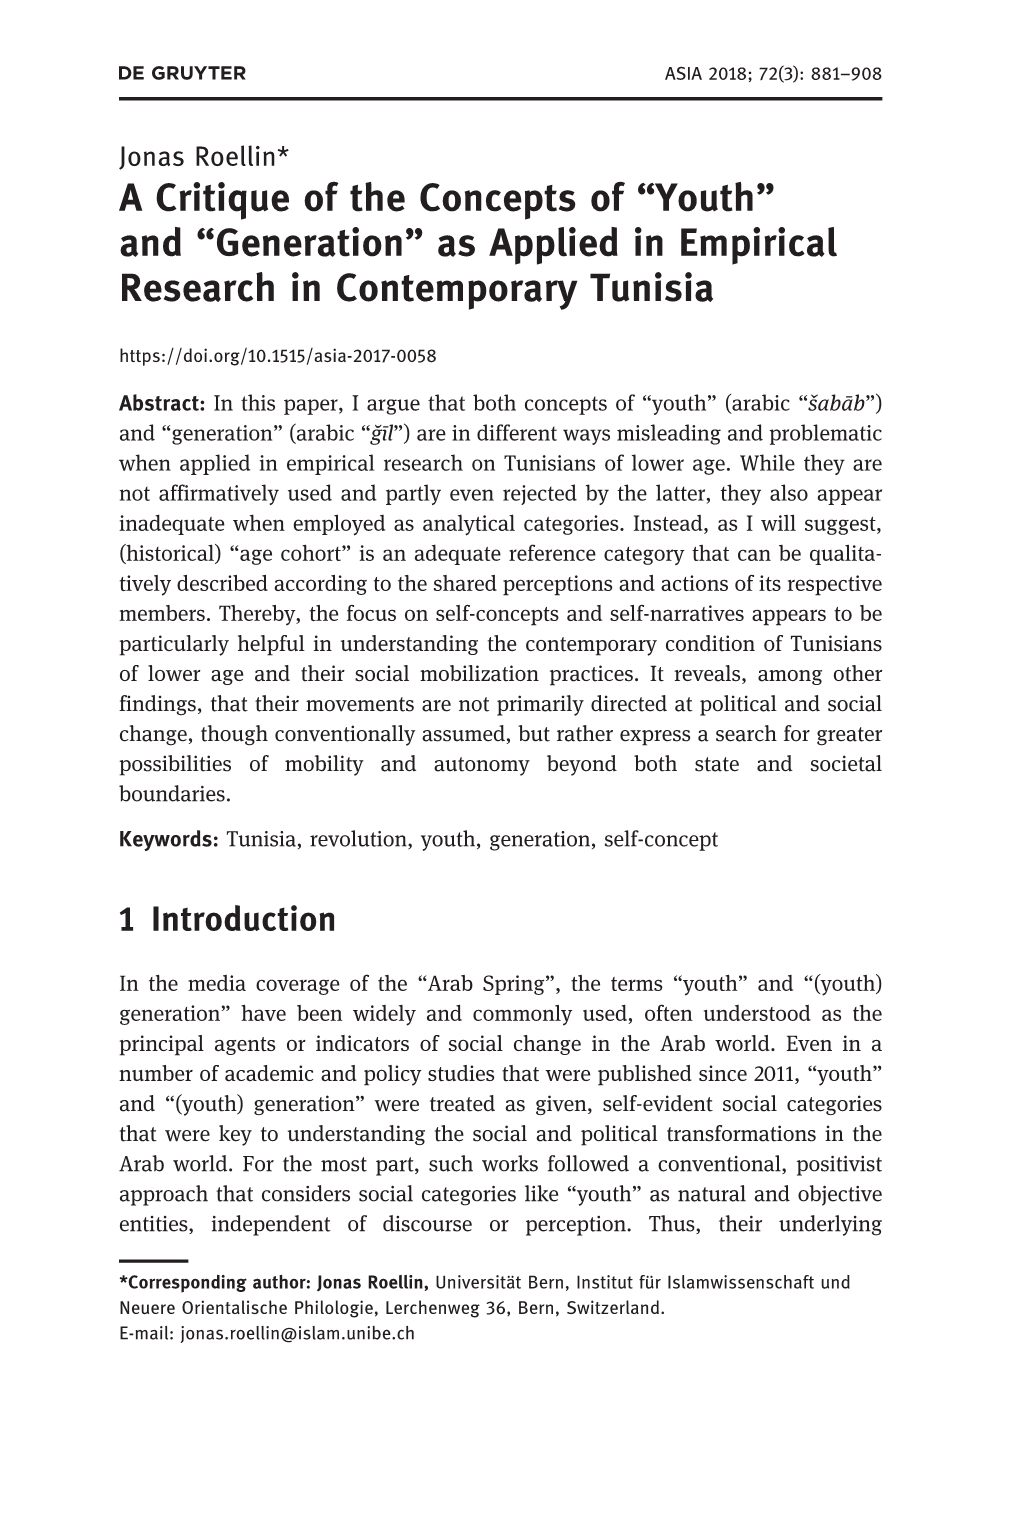 A Critique of the Concepts of “Youth” and “Generation” As Applied in Empirical Research in Contemporary Tunisia